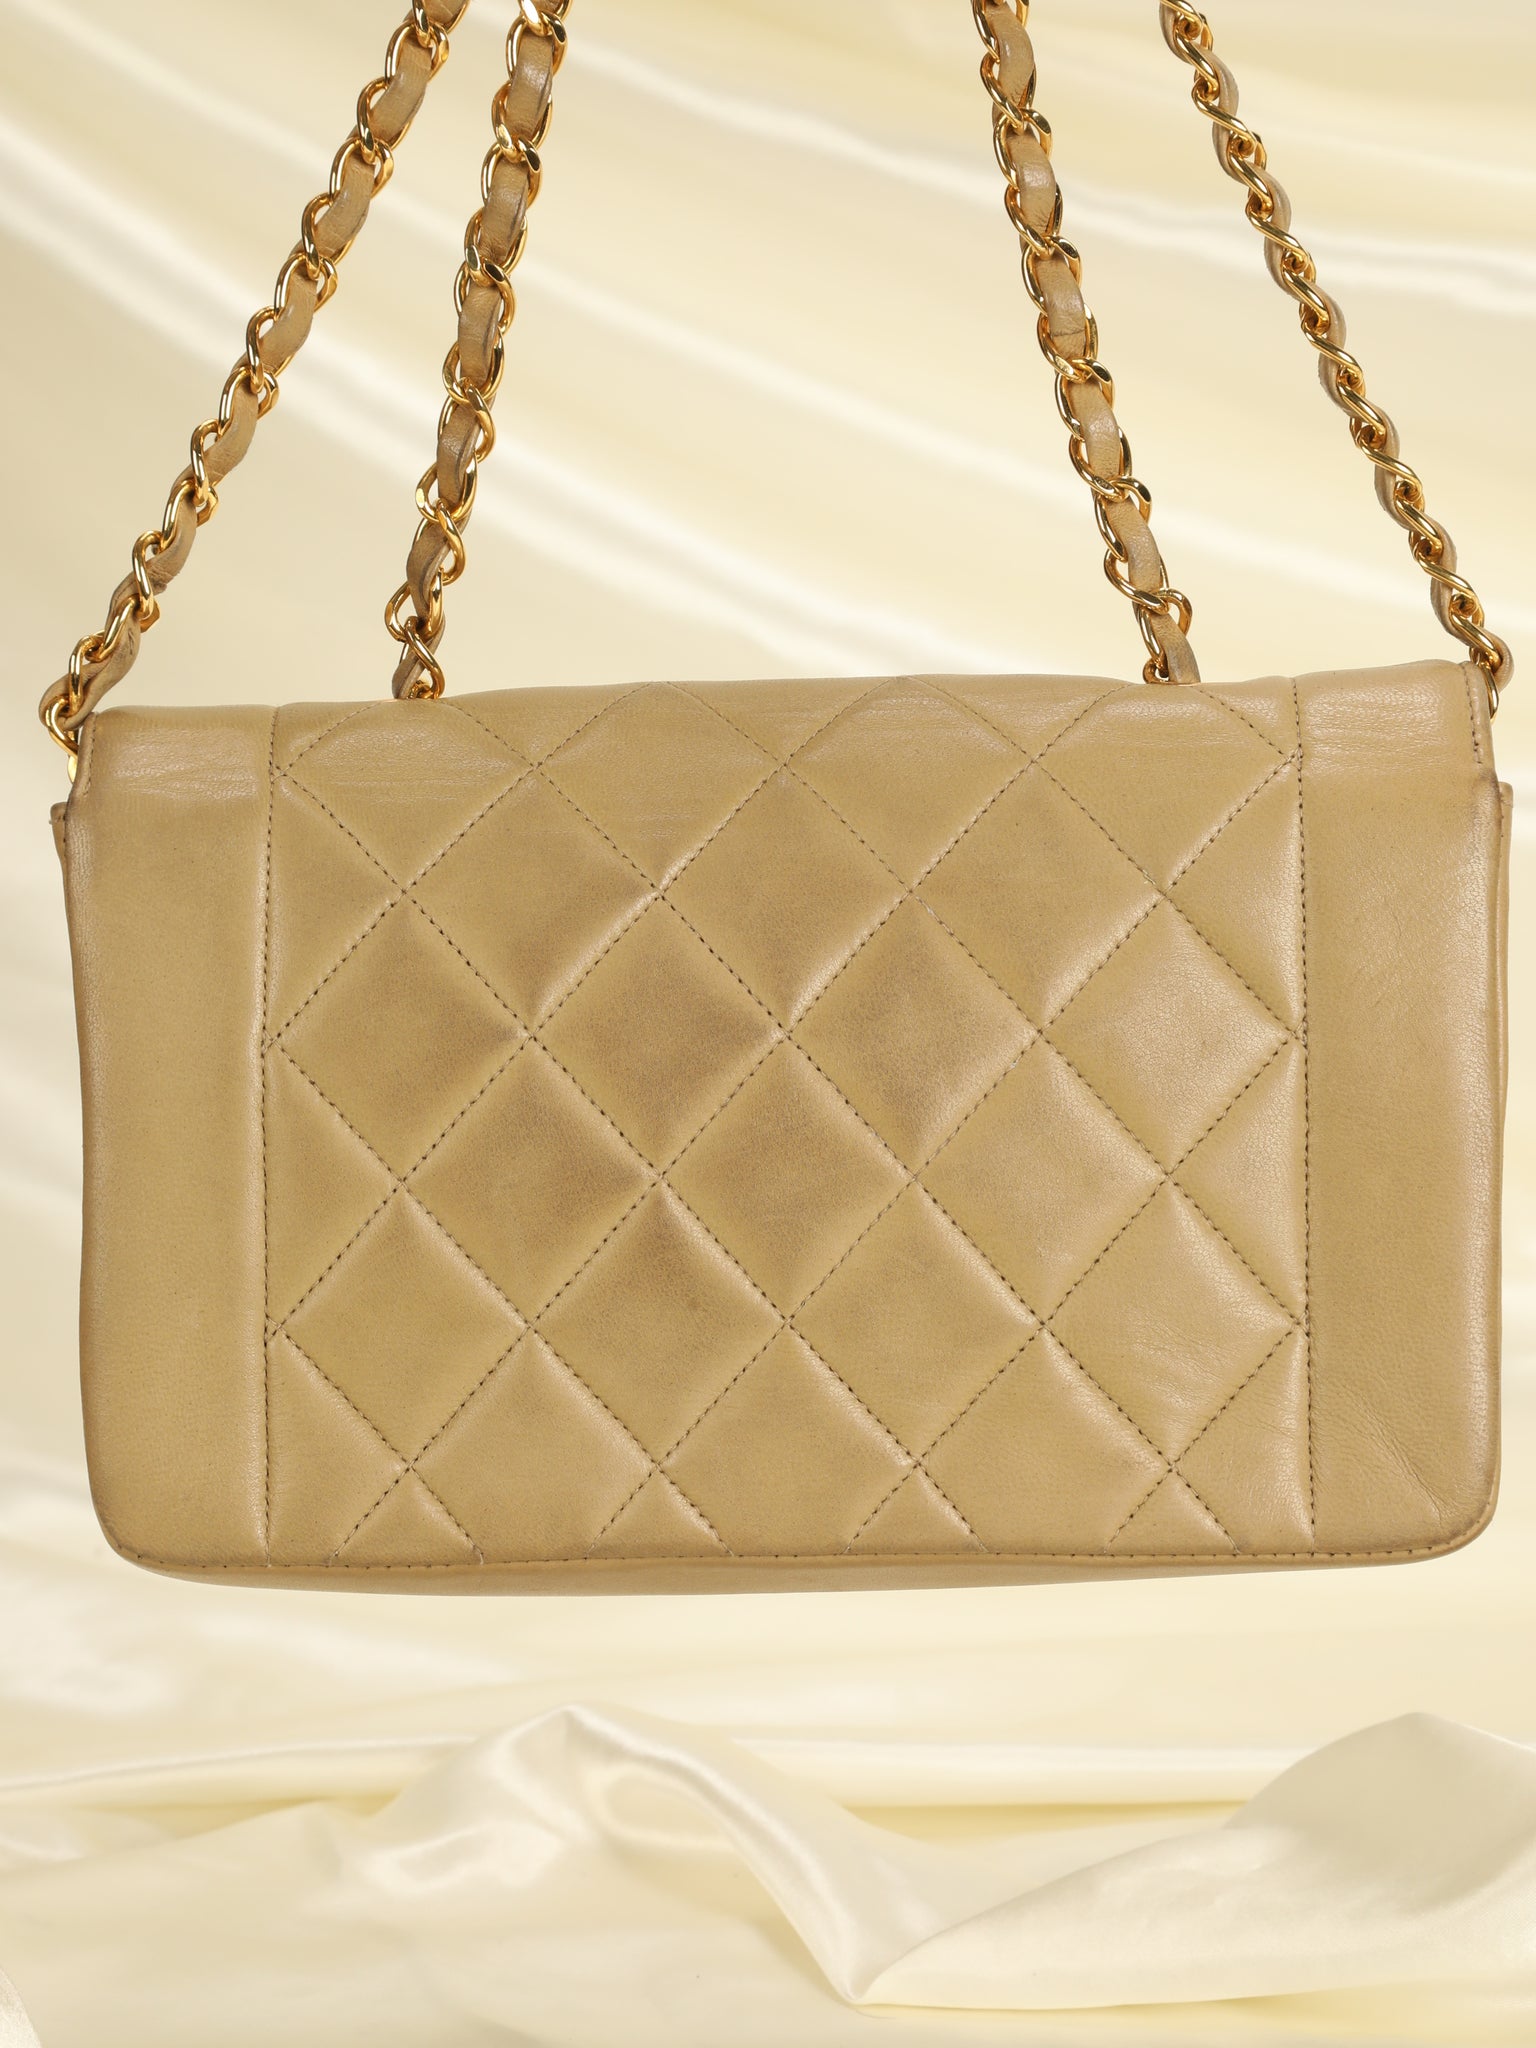 Chanel Pink Quilted Lambskin Classic Double Flap Small